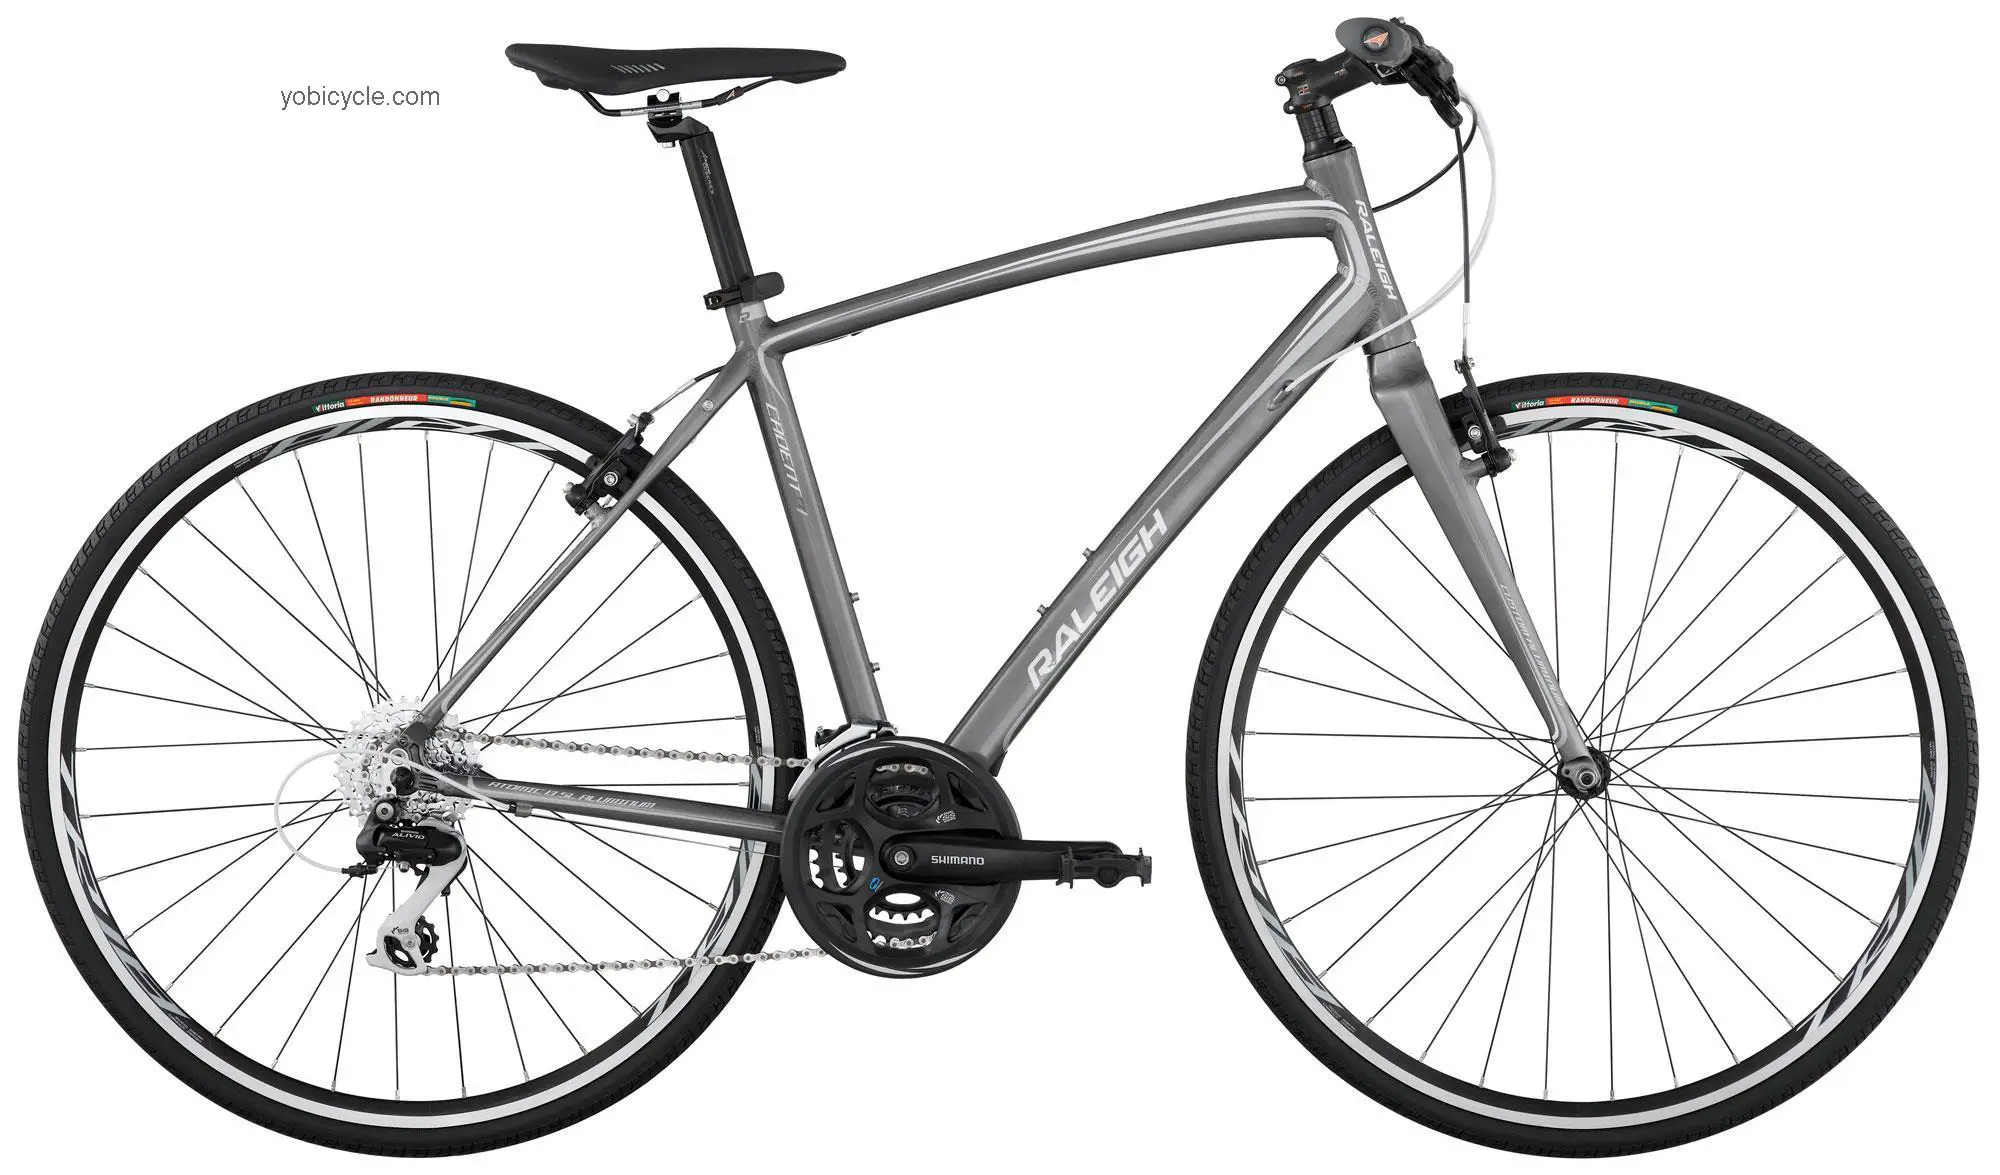 Raleigh Cadent FT1 2012 comparison online with competitors